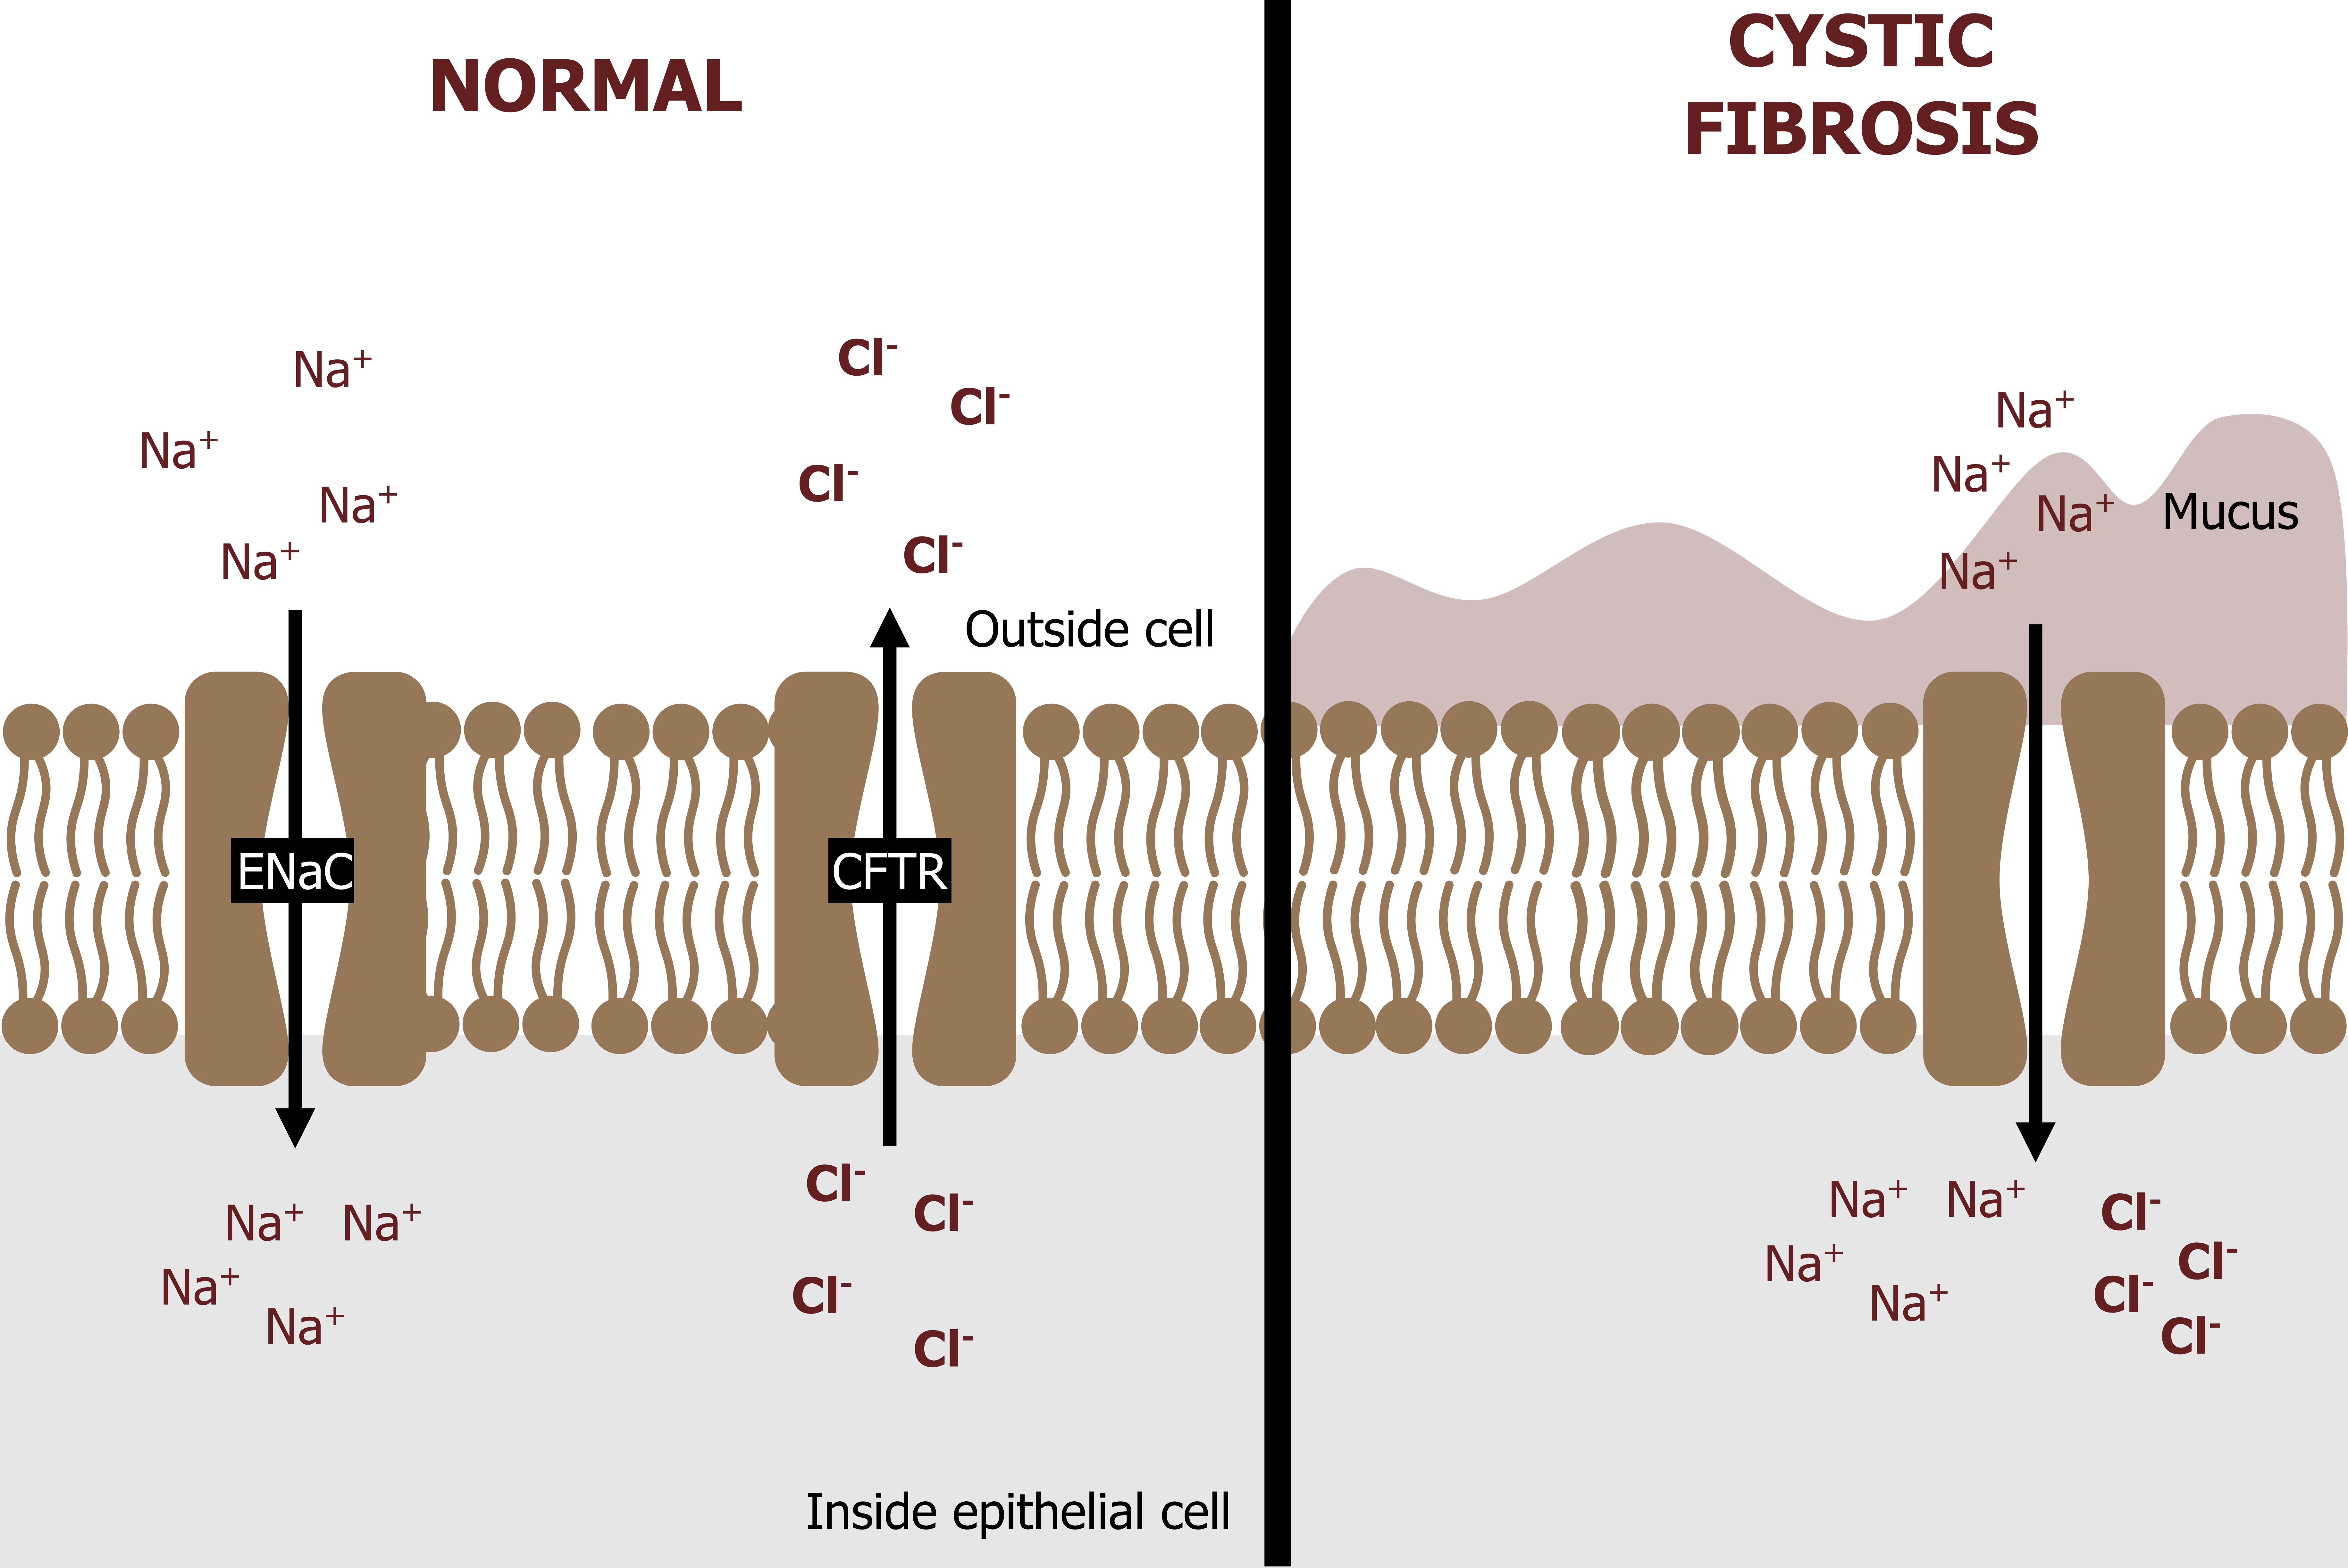 Normal epithelial cell in airway lumen: ENaC channel allowing Na+ into the cell and a CFTR channel allowing Cl- out of the cell. Cystic fibrosis epithelial cell in airway lumen: Same as normal, but CFTR channel does not open to allow Cl- to leave the cell due to mucus